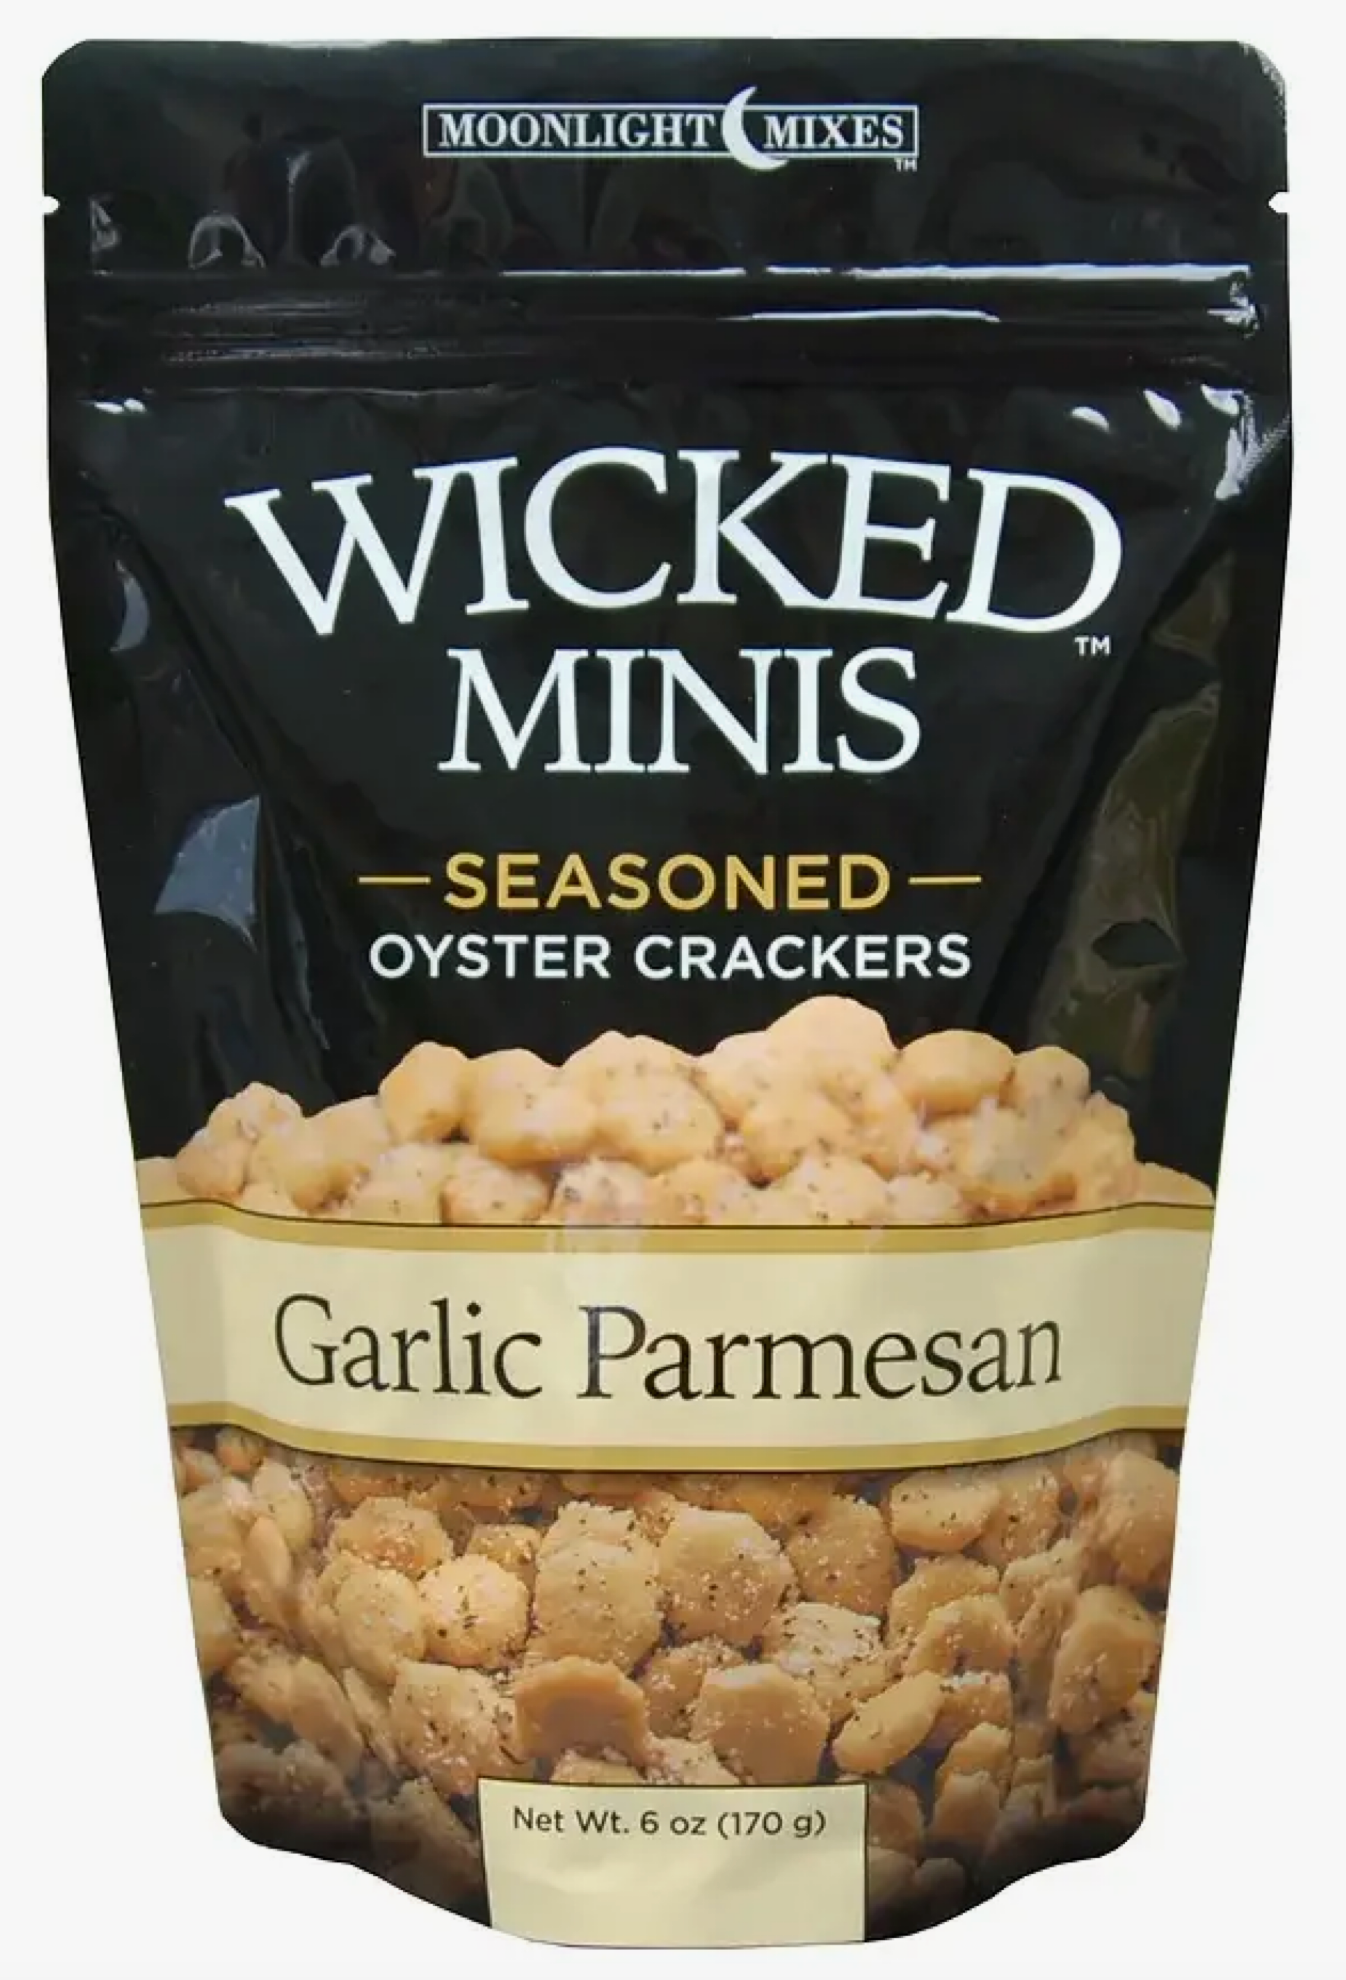 Moonlight Mixes - Wicked Minis Seasoned Oyster Crackers